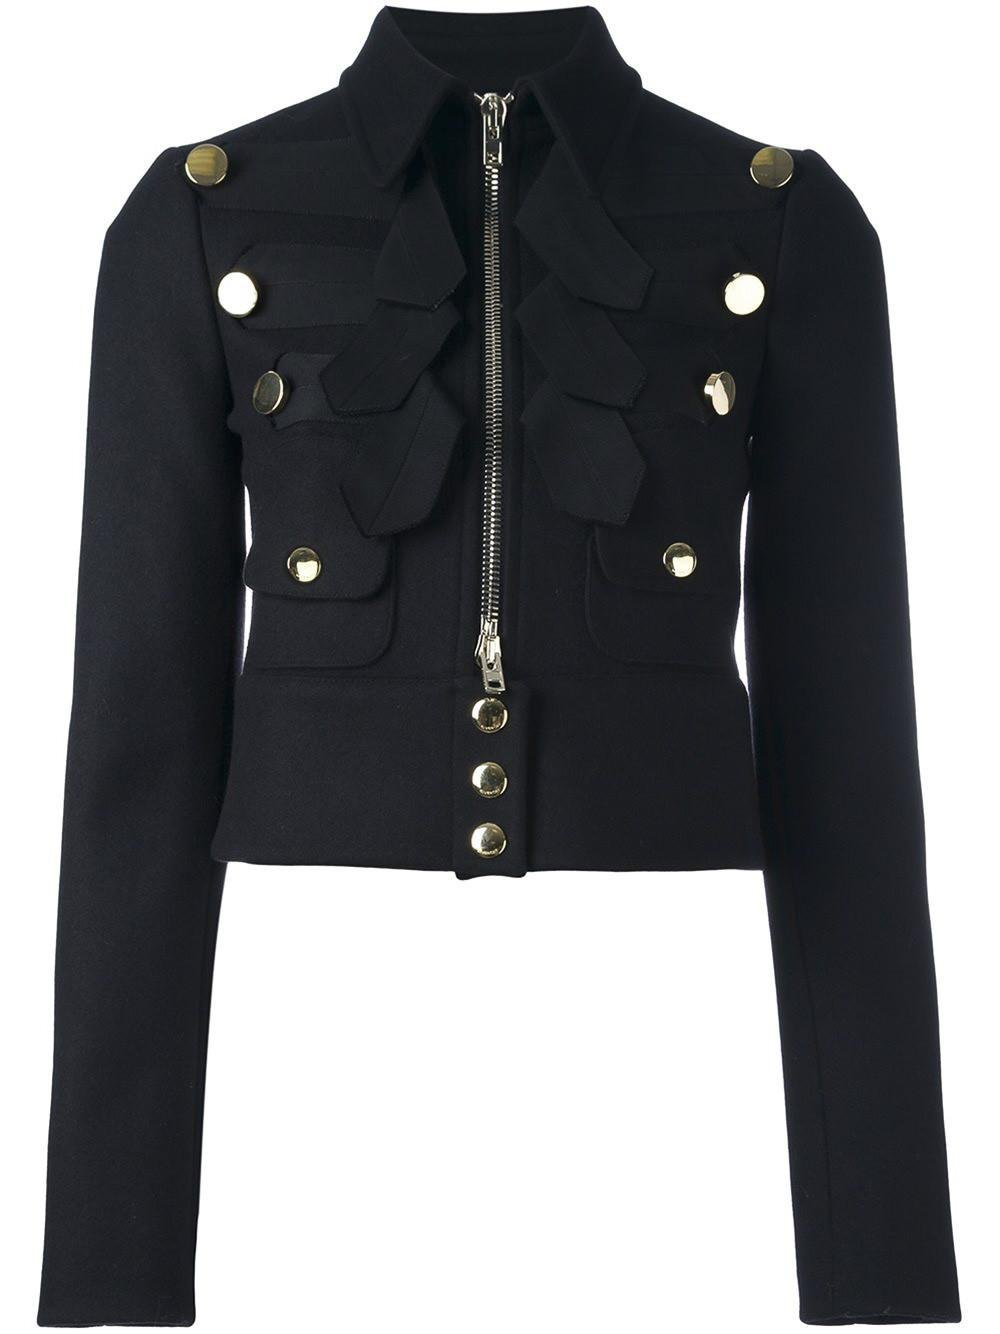 Lyst - Givenchy Cropped Military Jacket